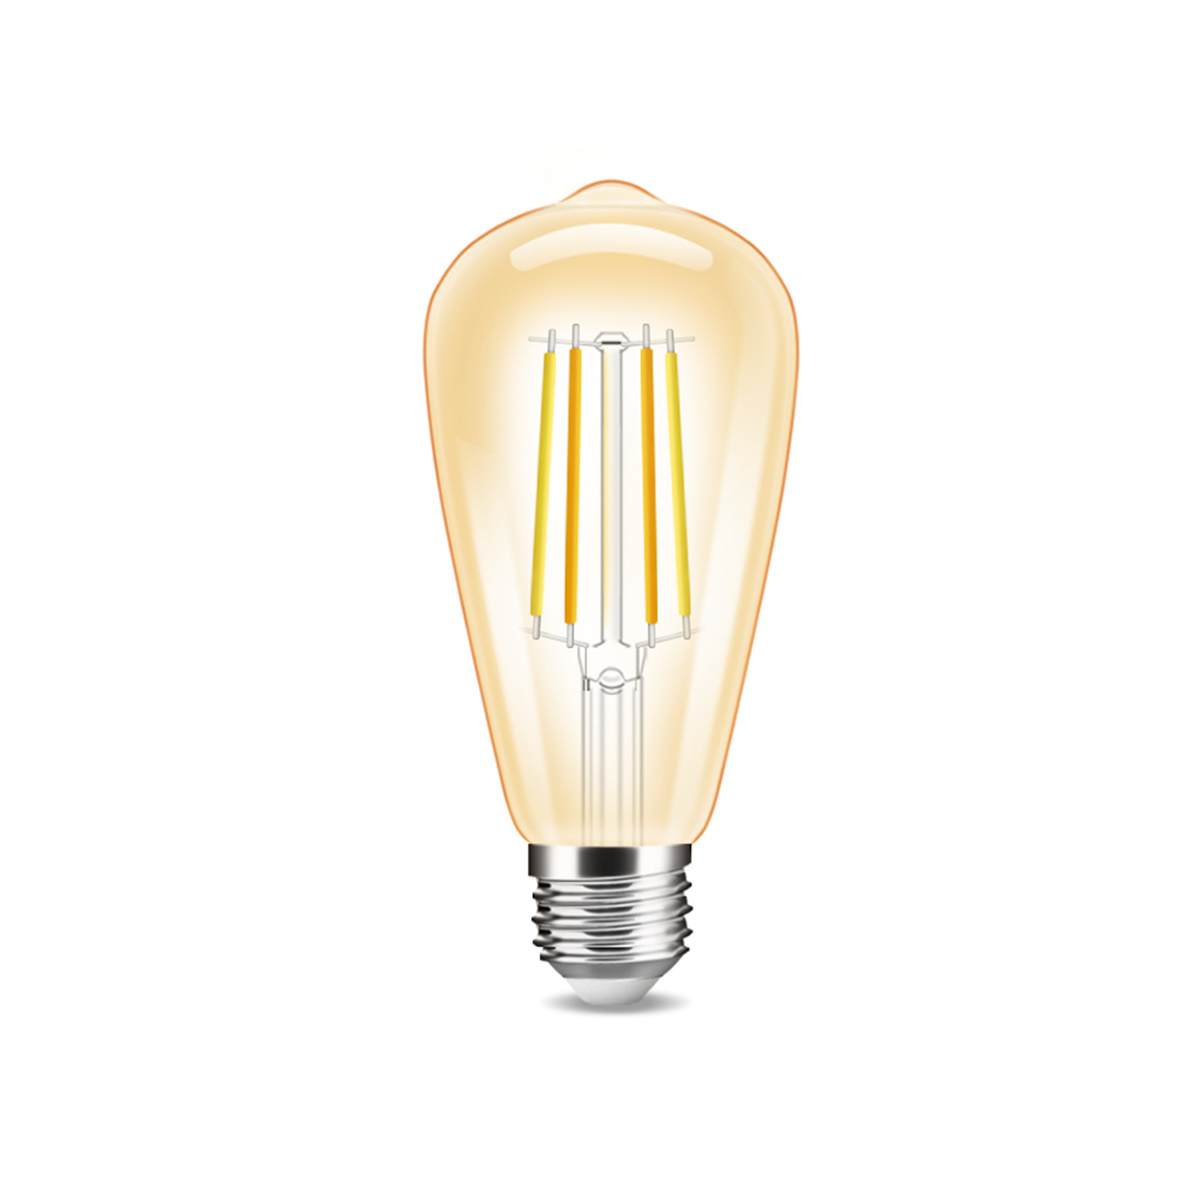 Hot-selling Wiz Bulb - Dimmable Smart Filament Bulb E27 Vintage With tunable white 2200-6500K CBS – C-Lux